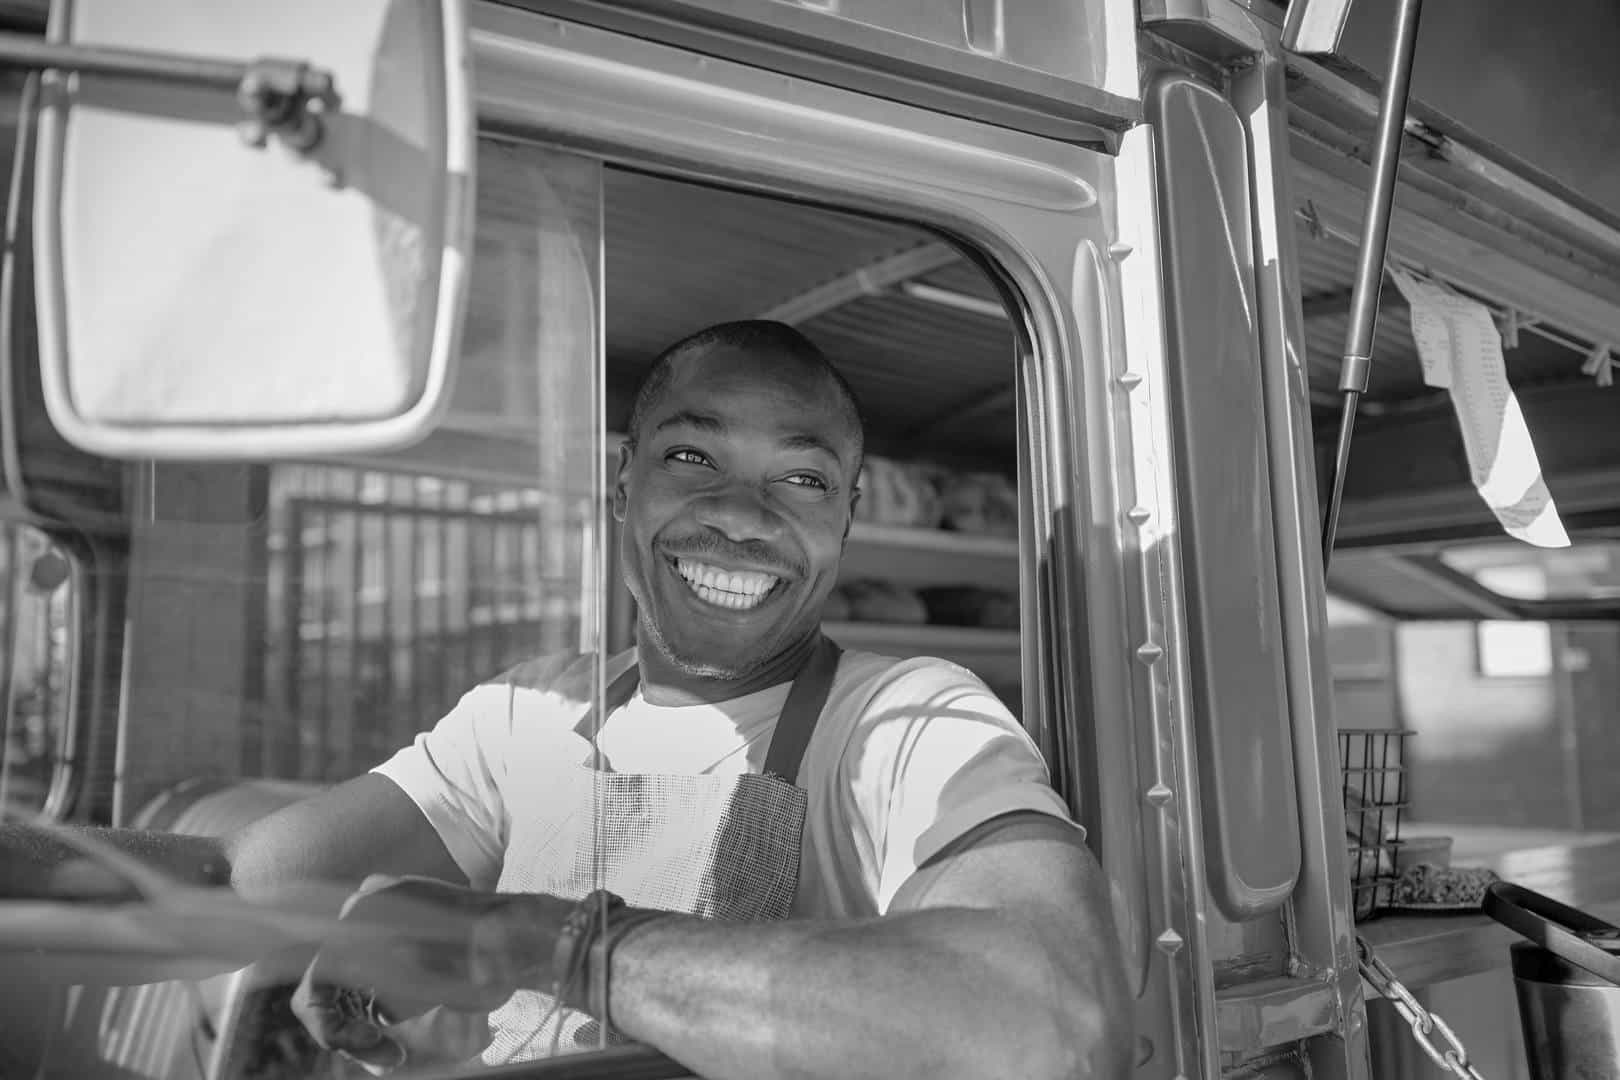 truck-driver-hiring-how-to-hire-truck-drivers-in-your-area-monster